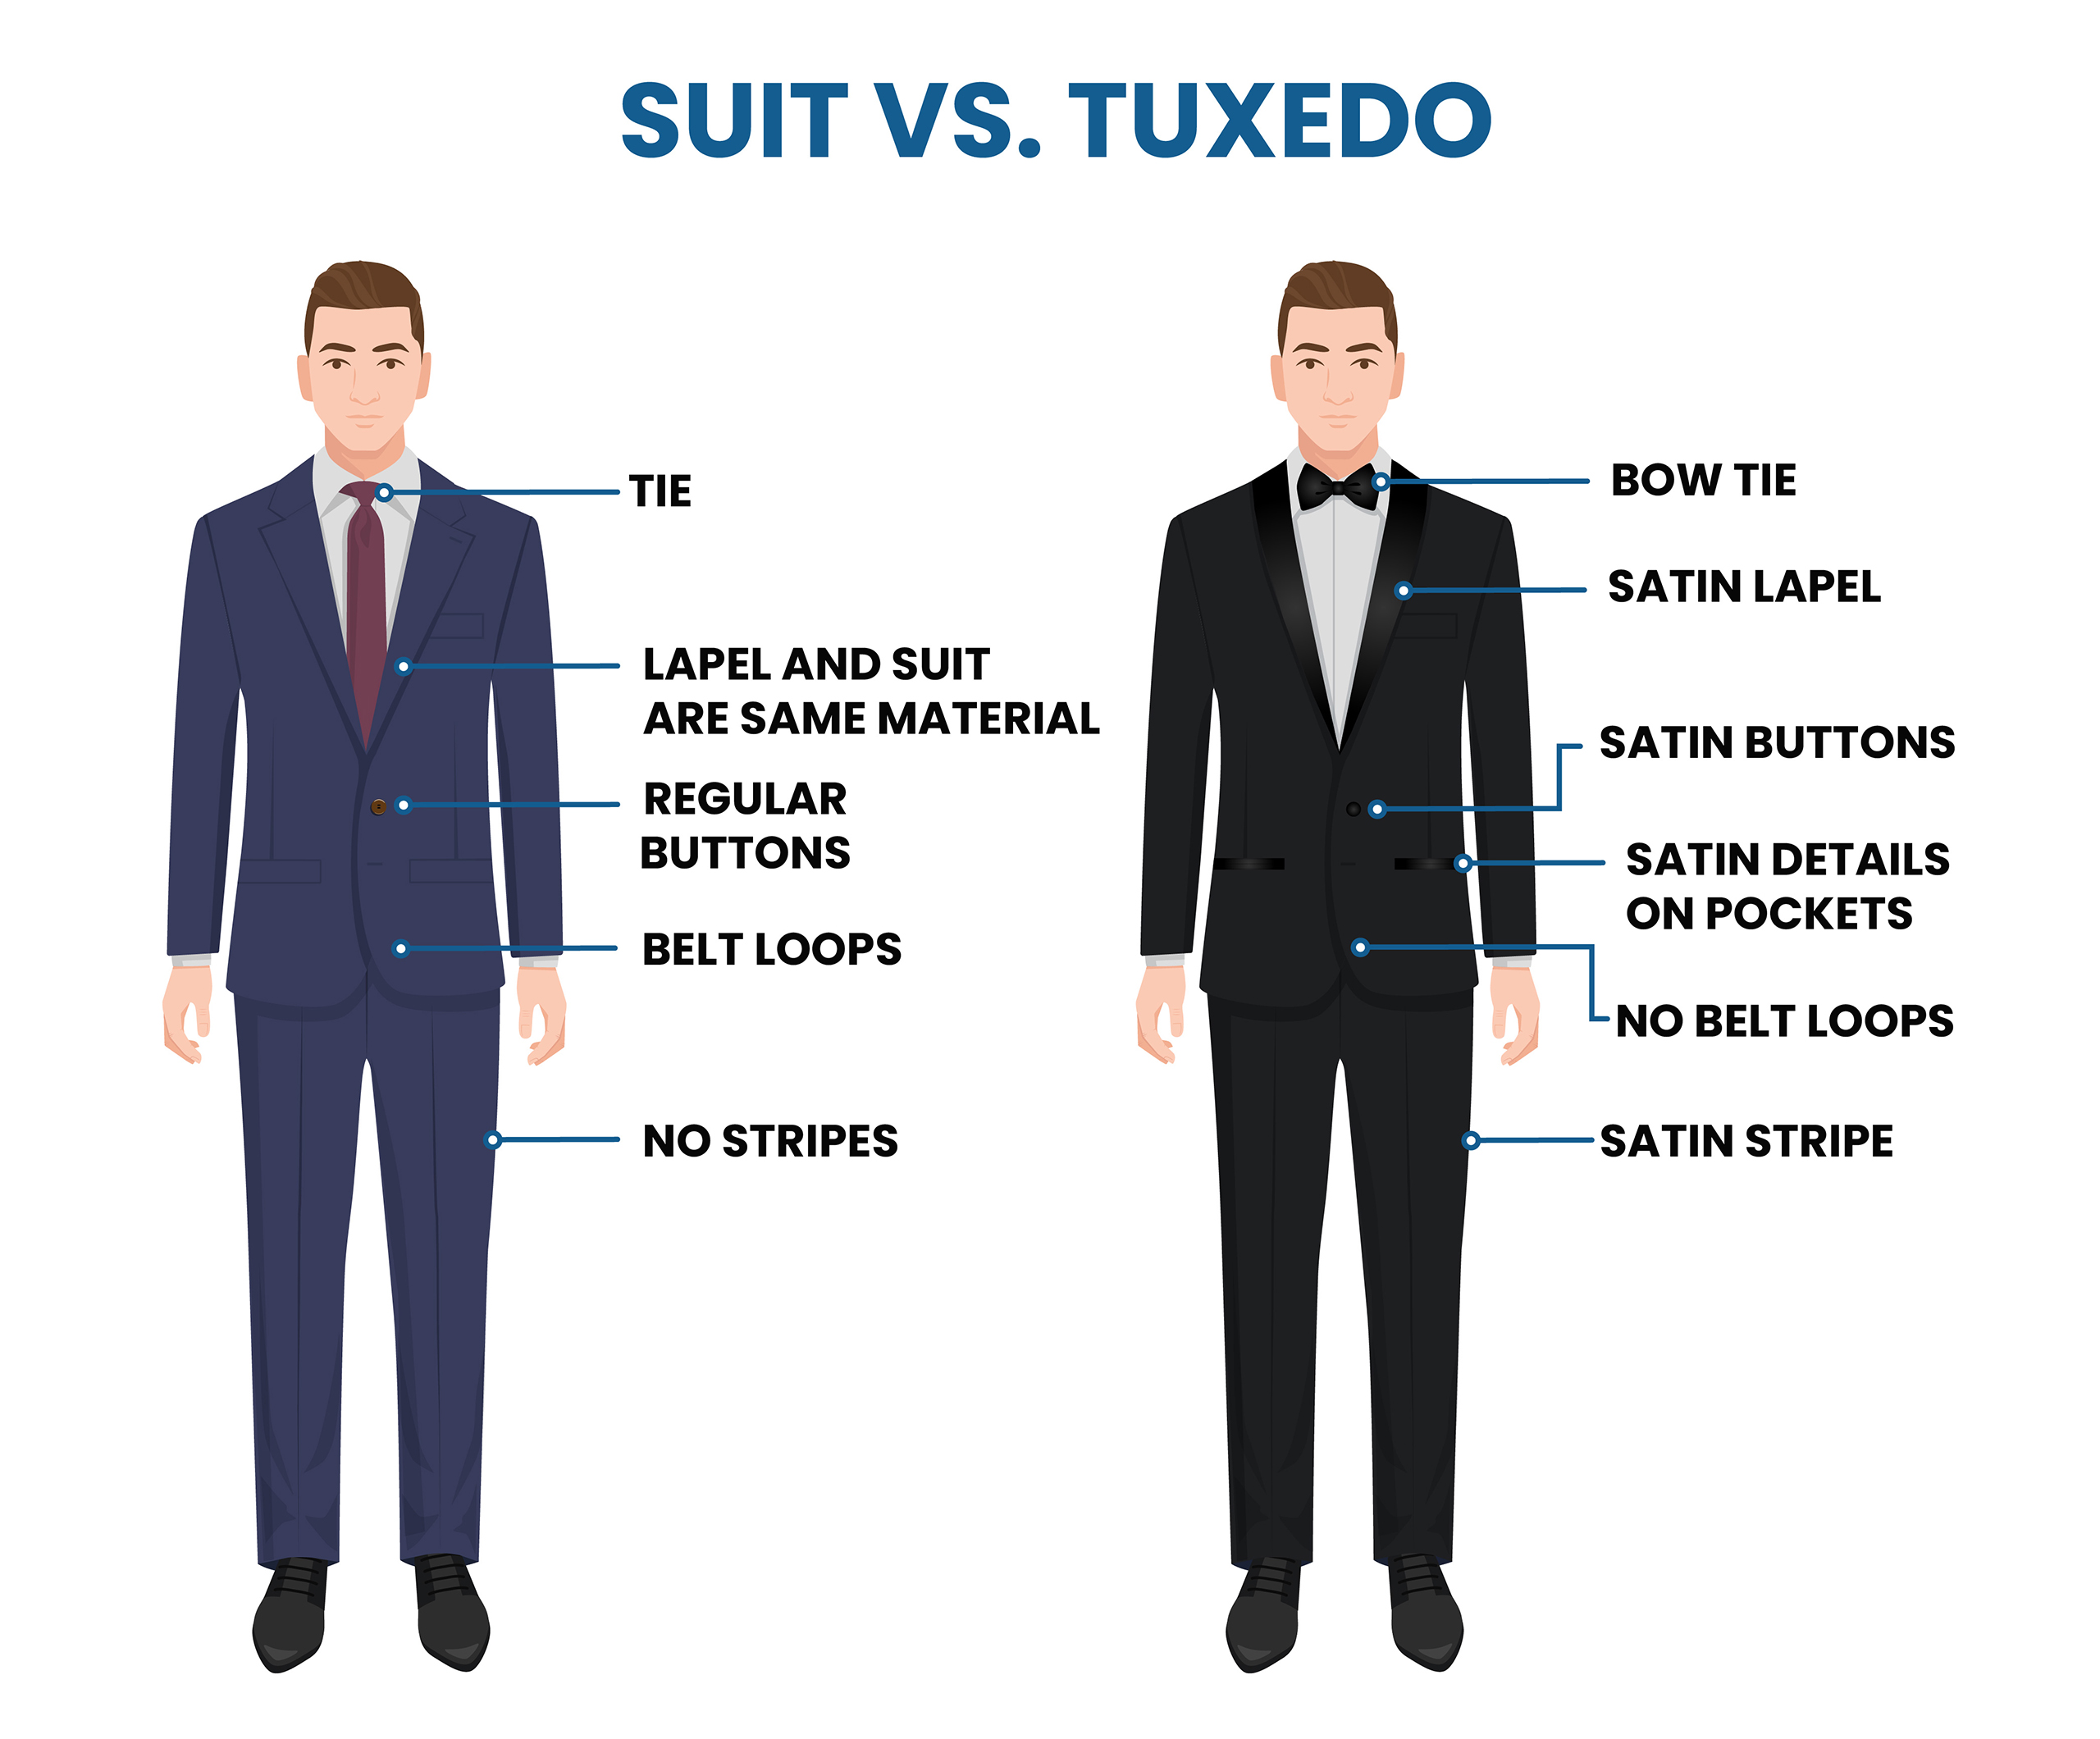 suit vs tuxedo: differences in style